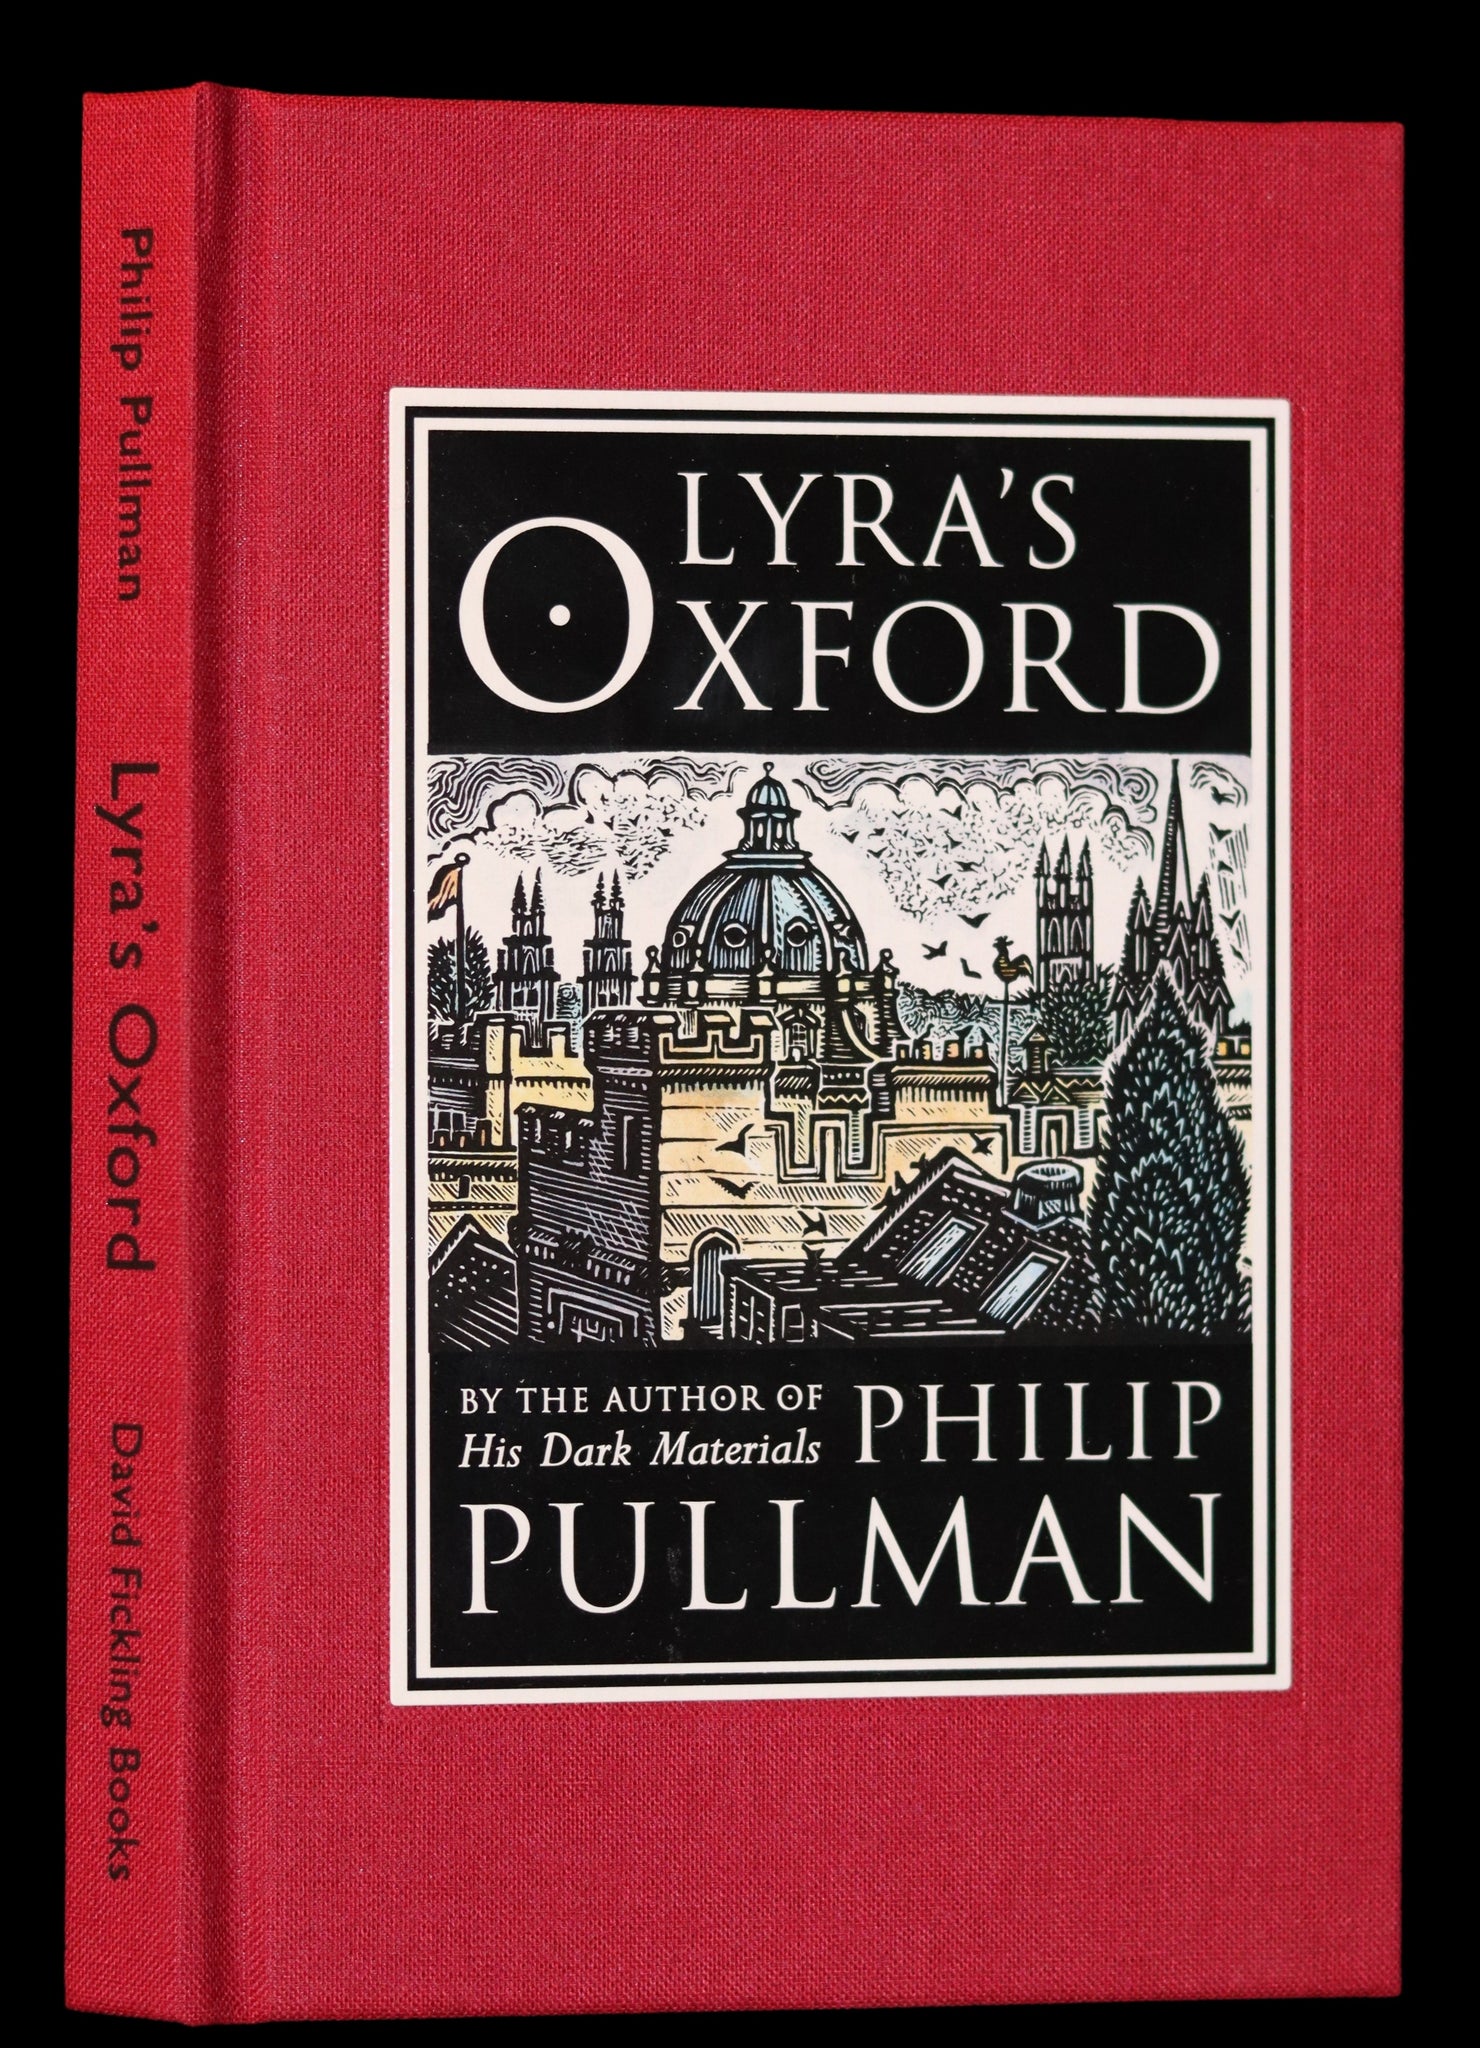 2003 Signed First Edition - LYRA'S OXFORD [His Dark Materials] by Philip Pullman.